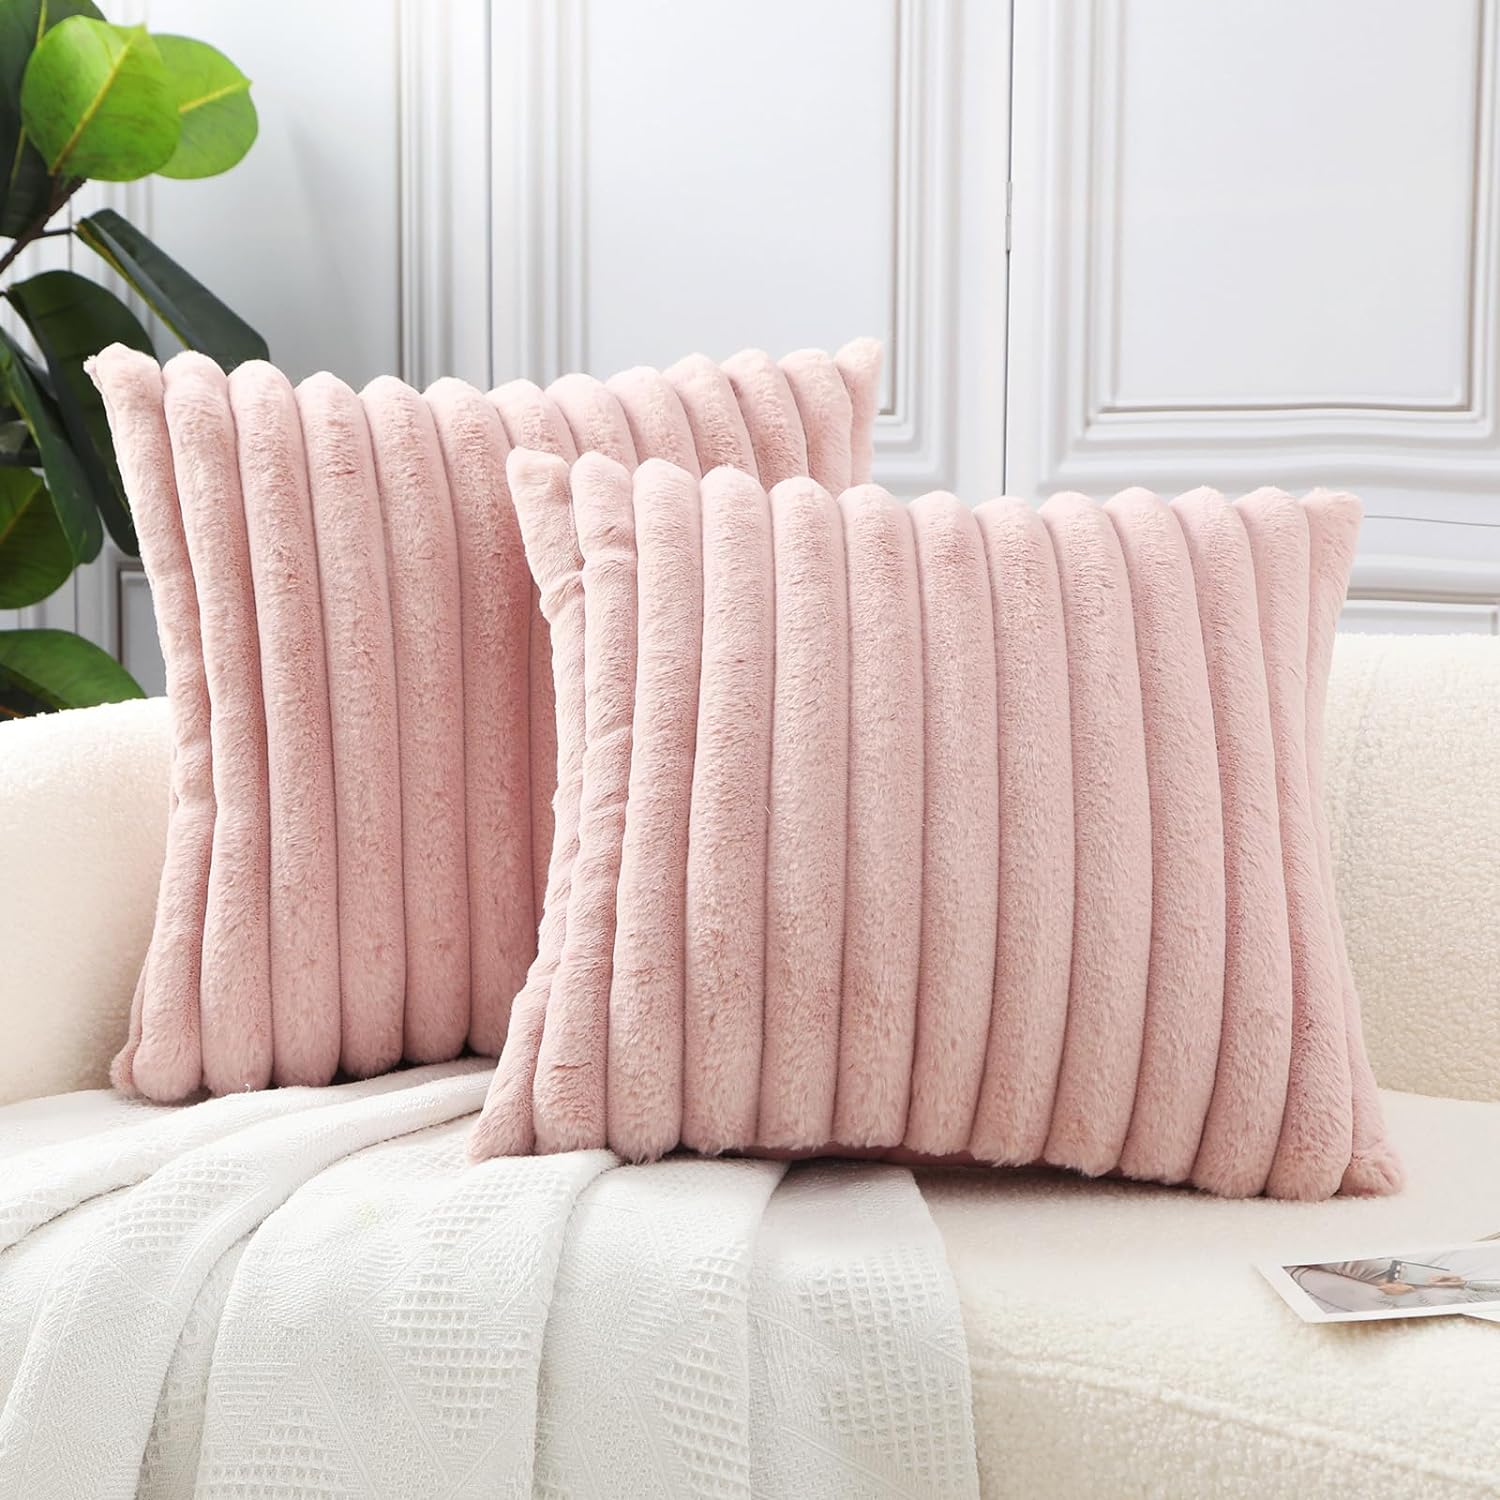 HPUK Faux Fur Plush Striped Throw Pillow Covers 18x18 Inch, Decorative Fluffy Couch Pillow Covers for Living Room, Accent Cozy and Fuzzy Pillow Covers for Couch, Sofa, and Bedroom(Light Pink)